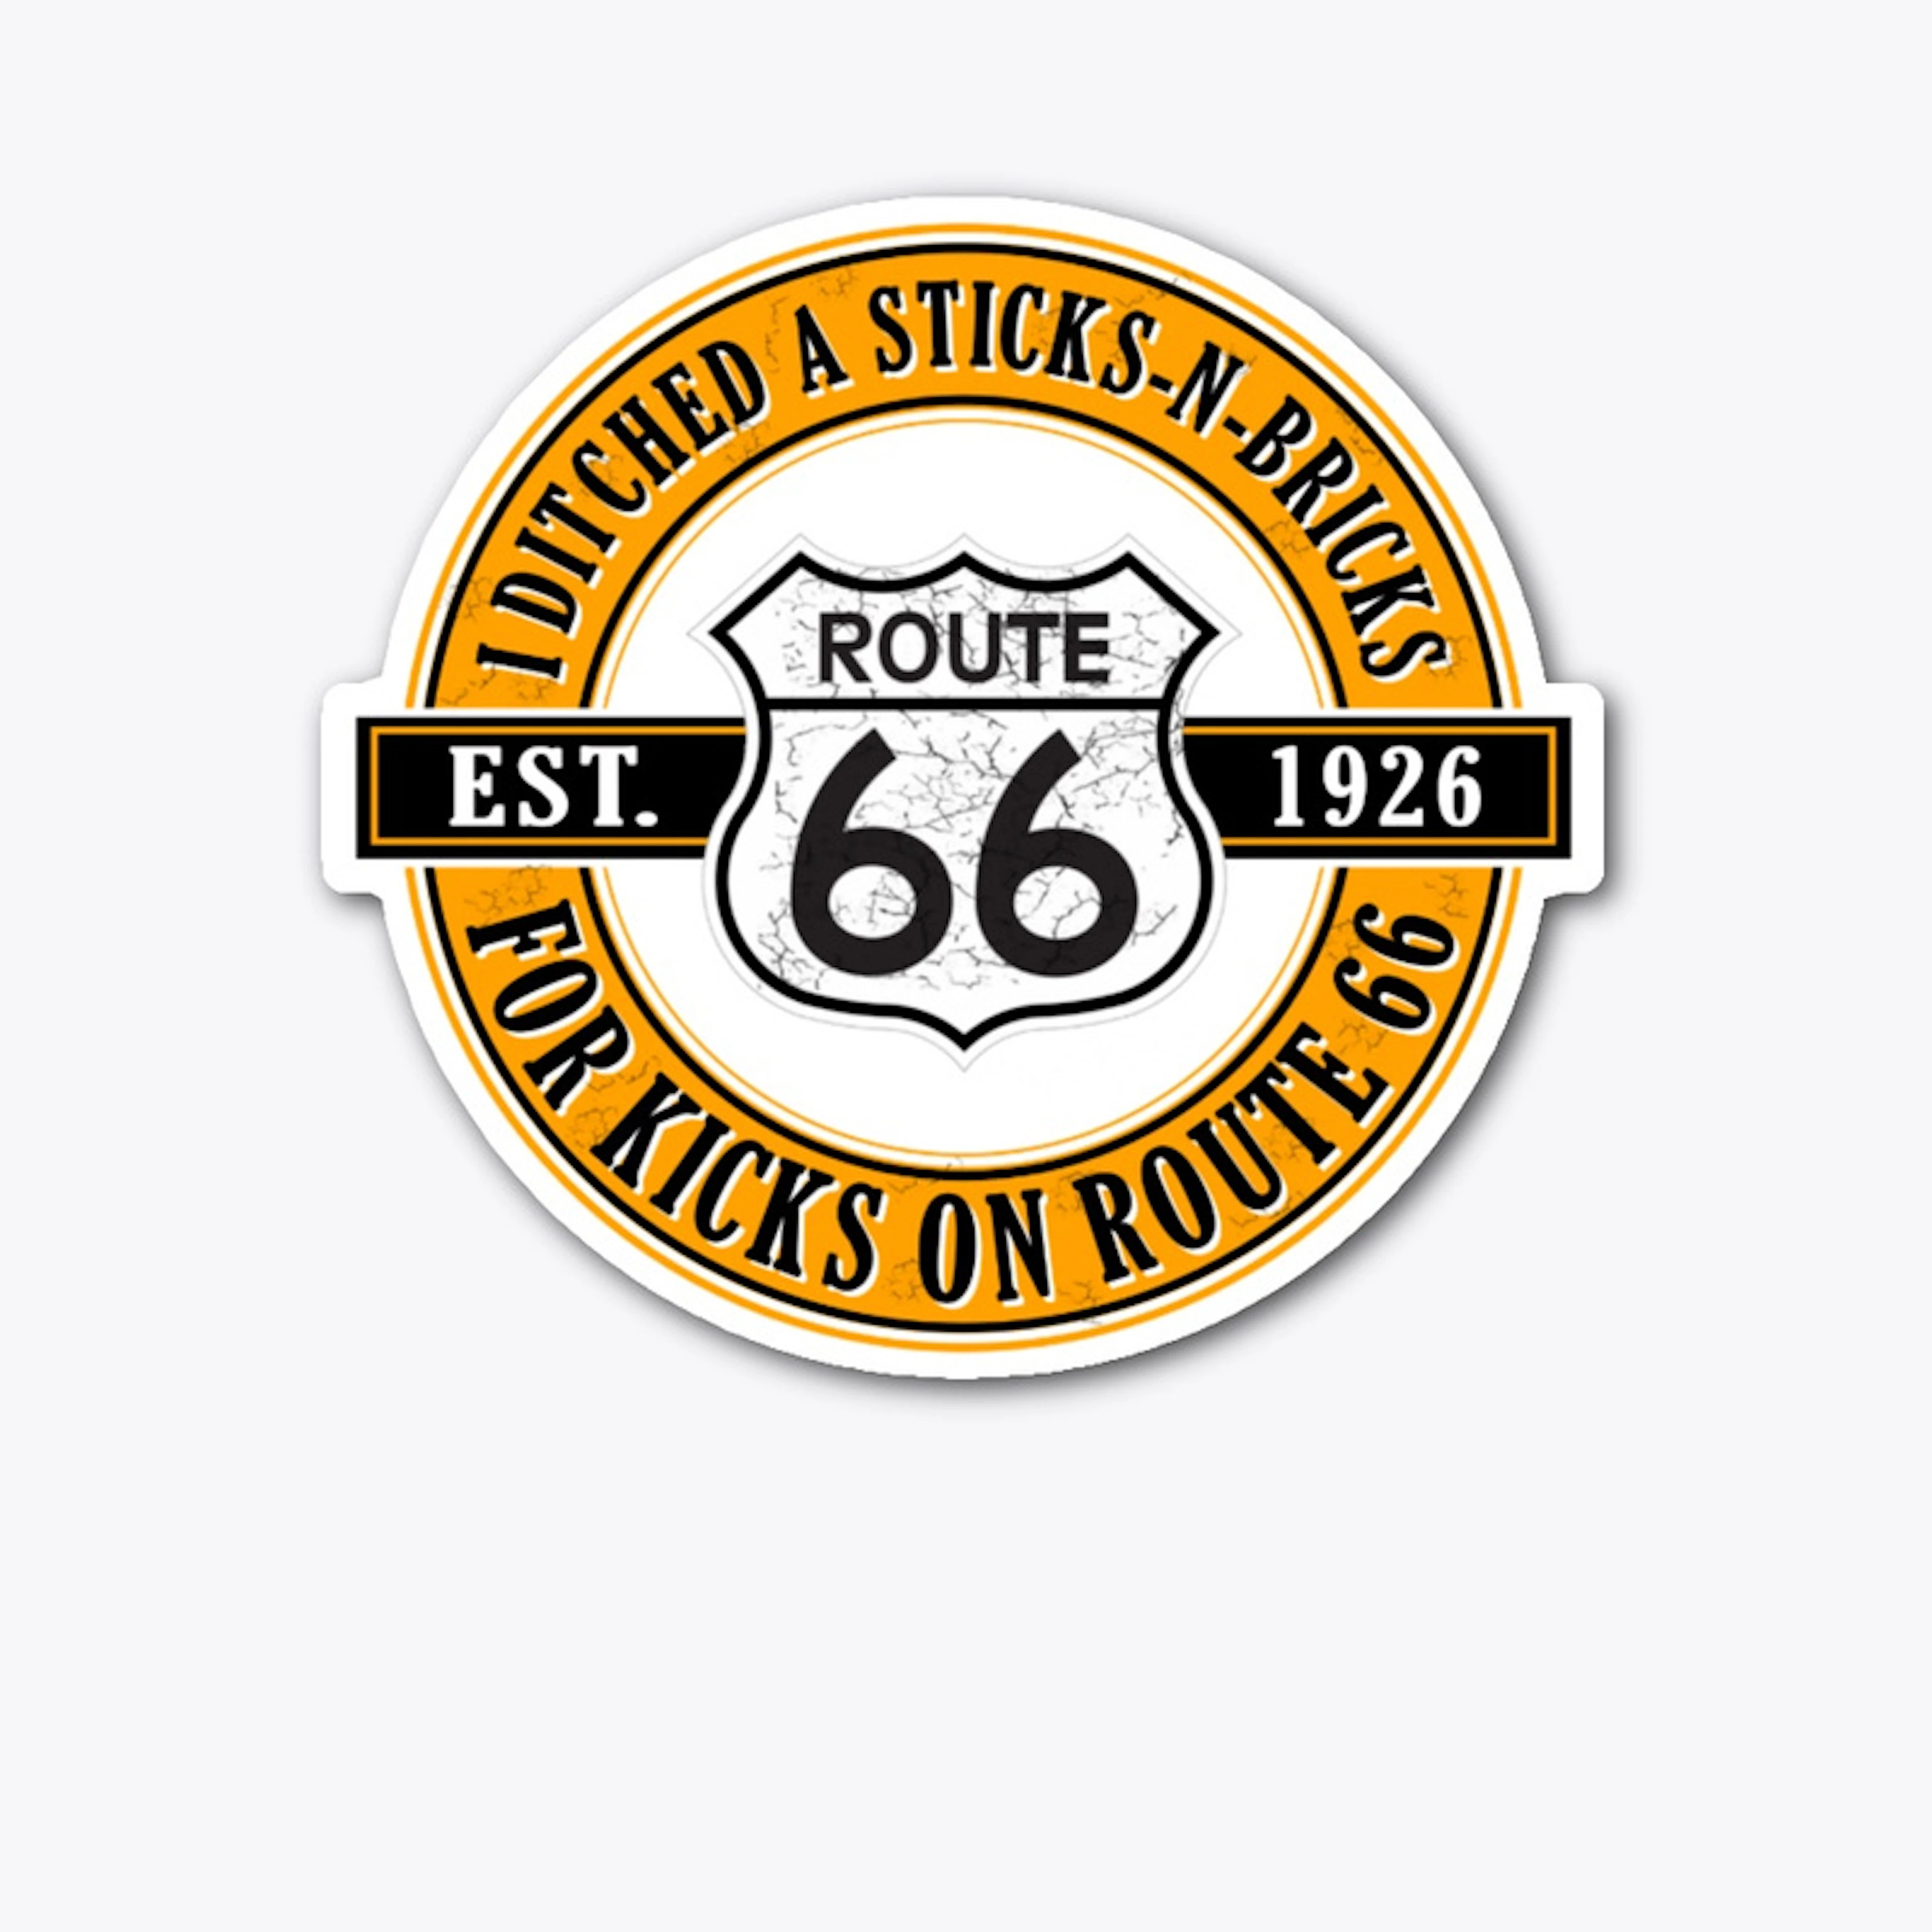 Ditched Sticks-n-Bricks Route 66